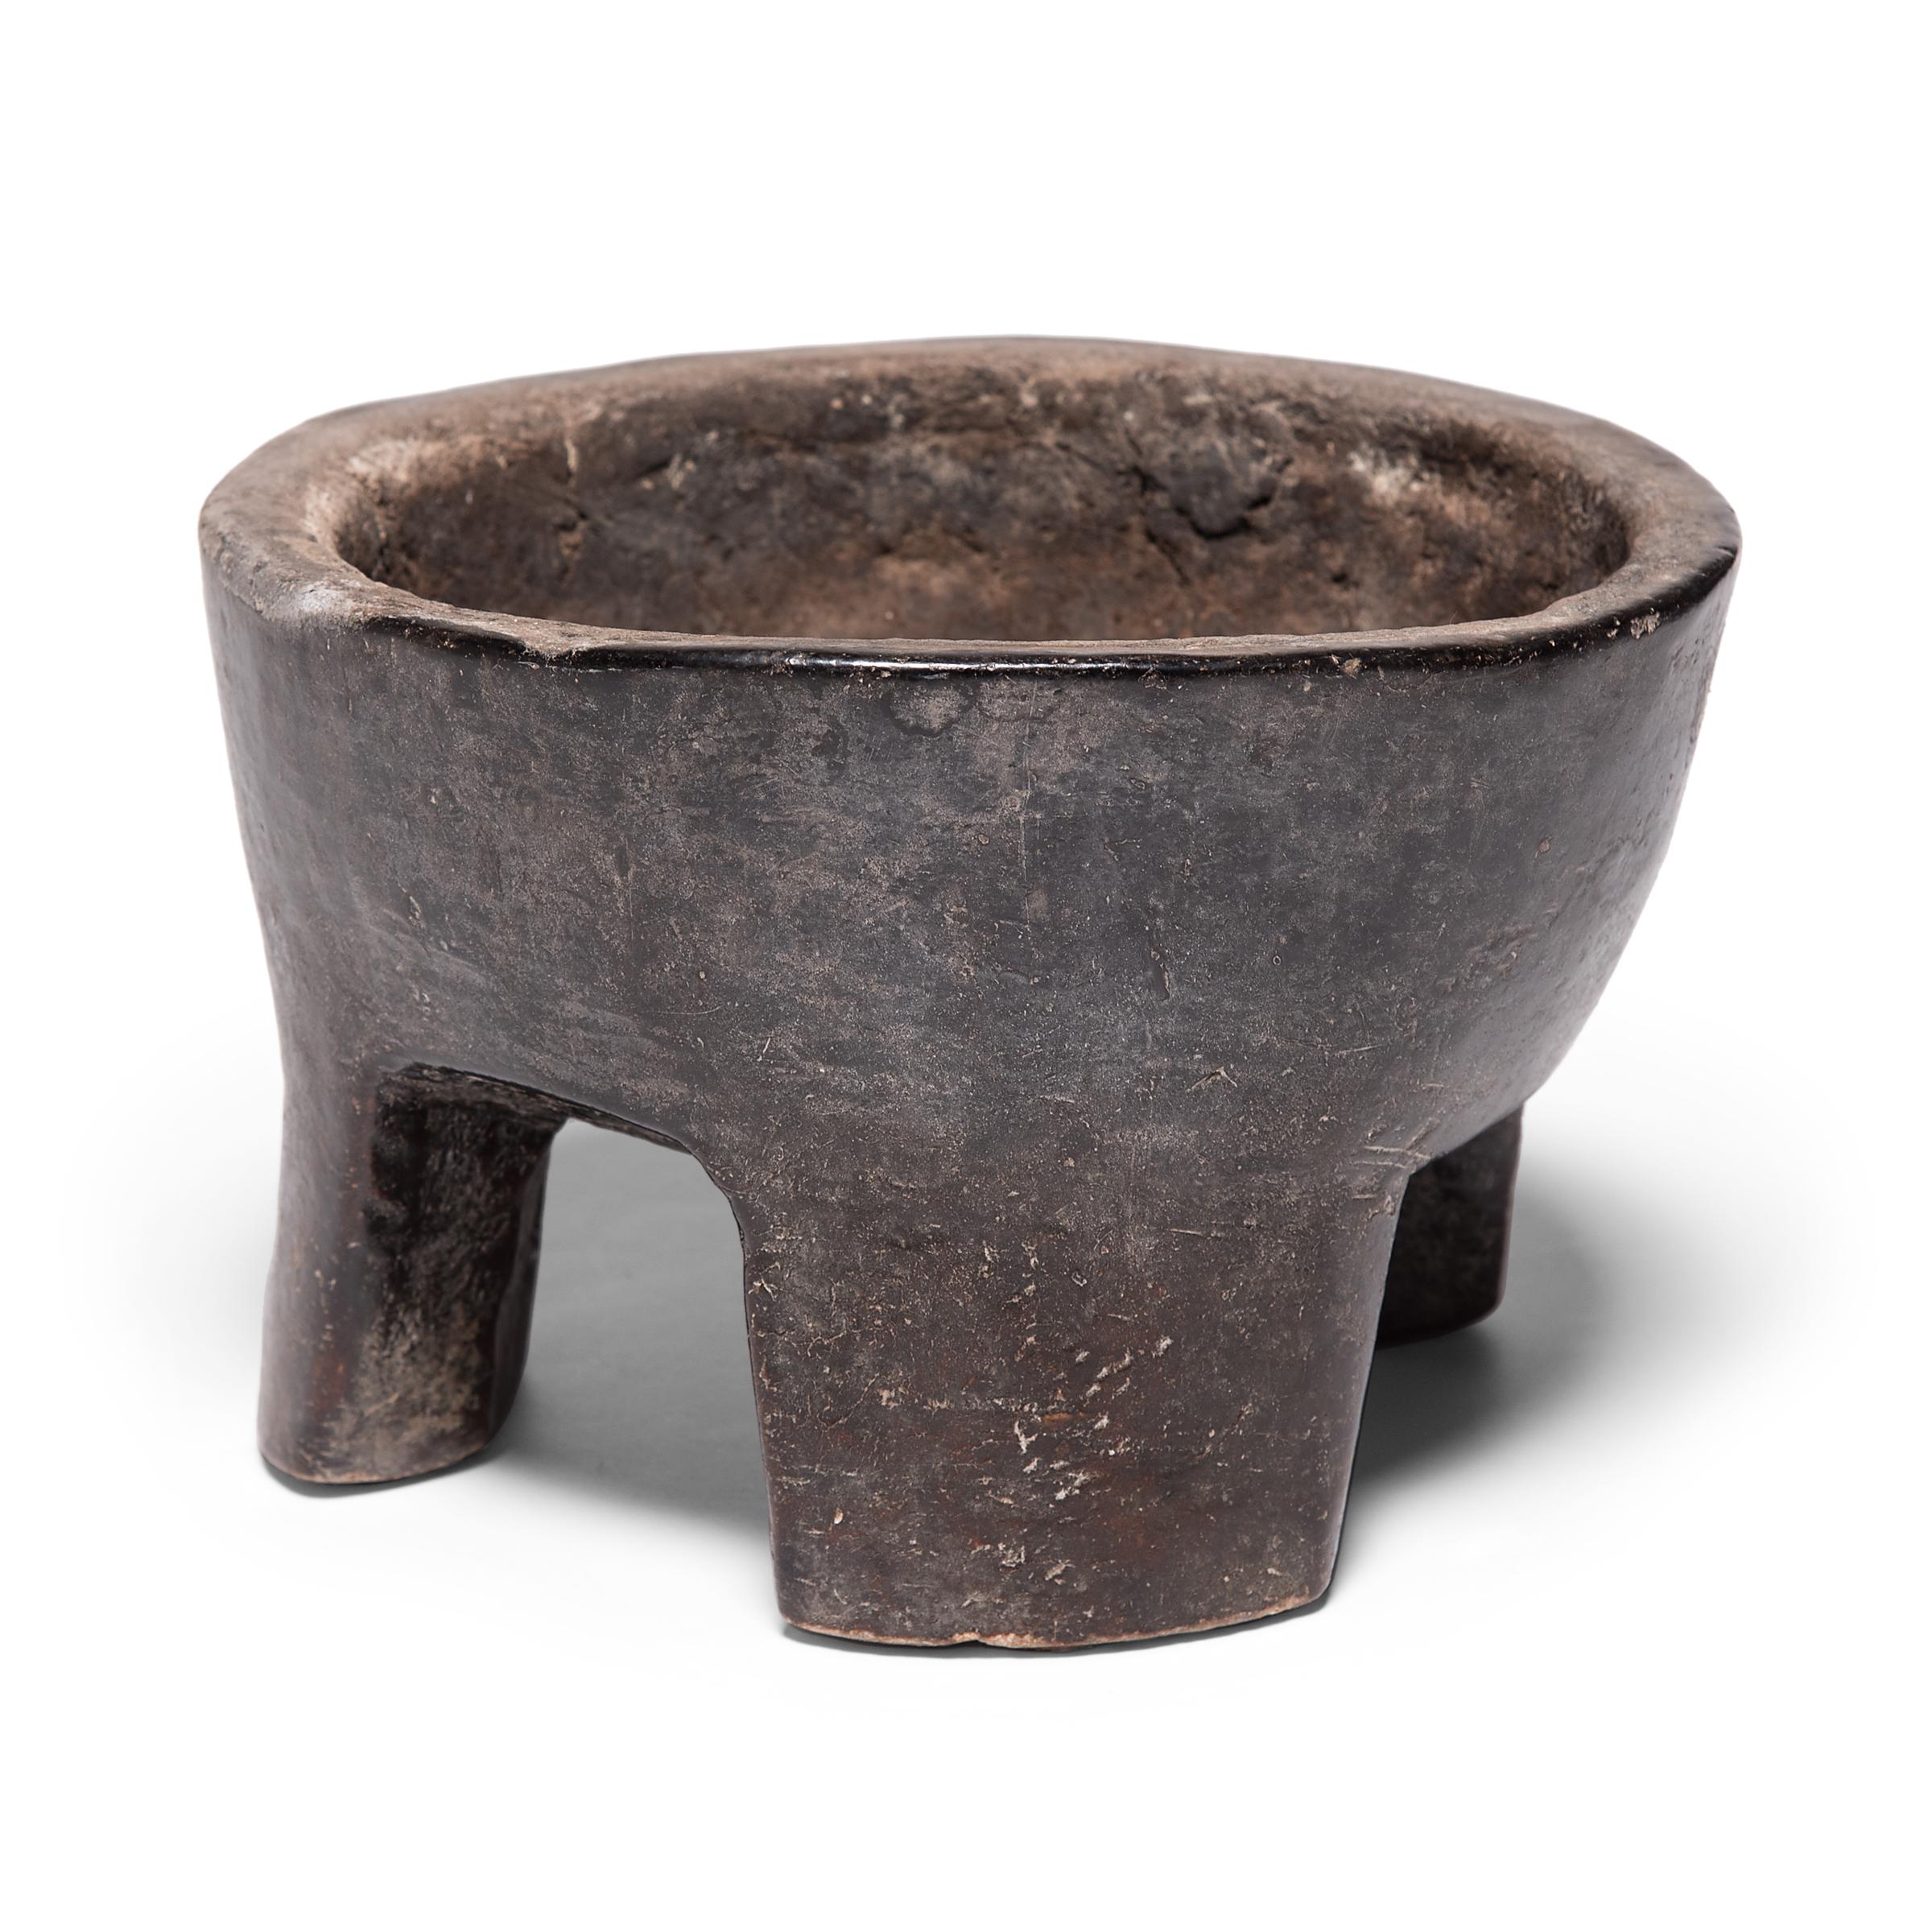 Designed to hold burning incense, censer bowls have been used throughout China for thousands of years. Incense made from dried aromatic plants and essential oils would be burned within the home to cleanse interiors and honor ancestors during ritual